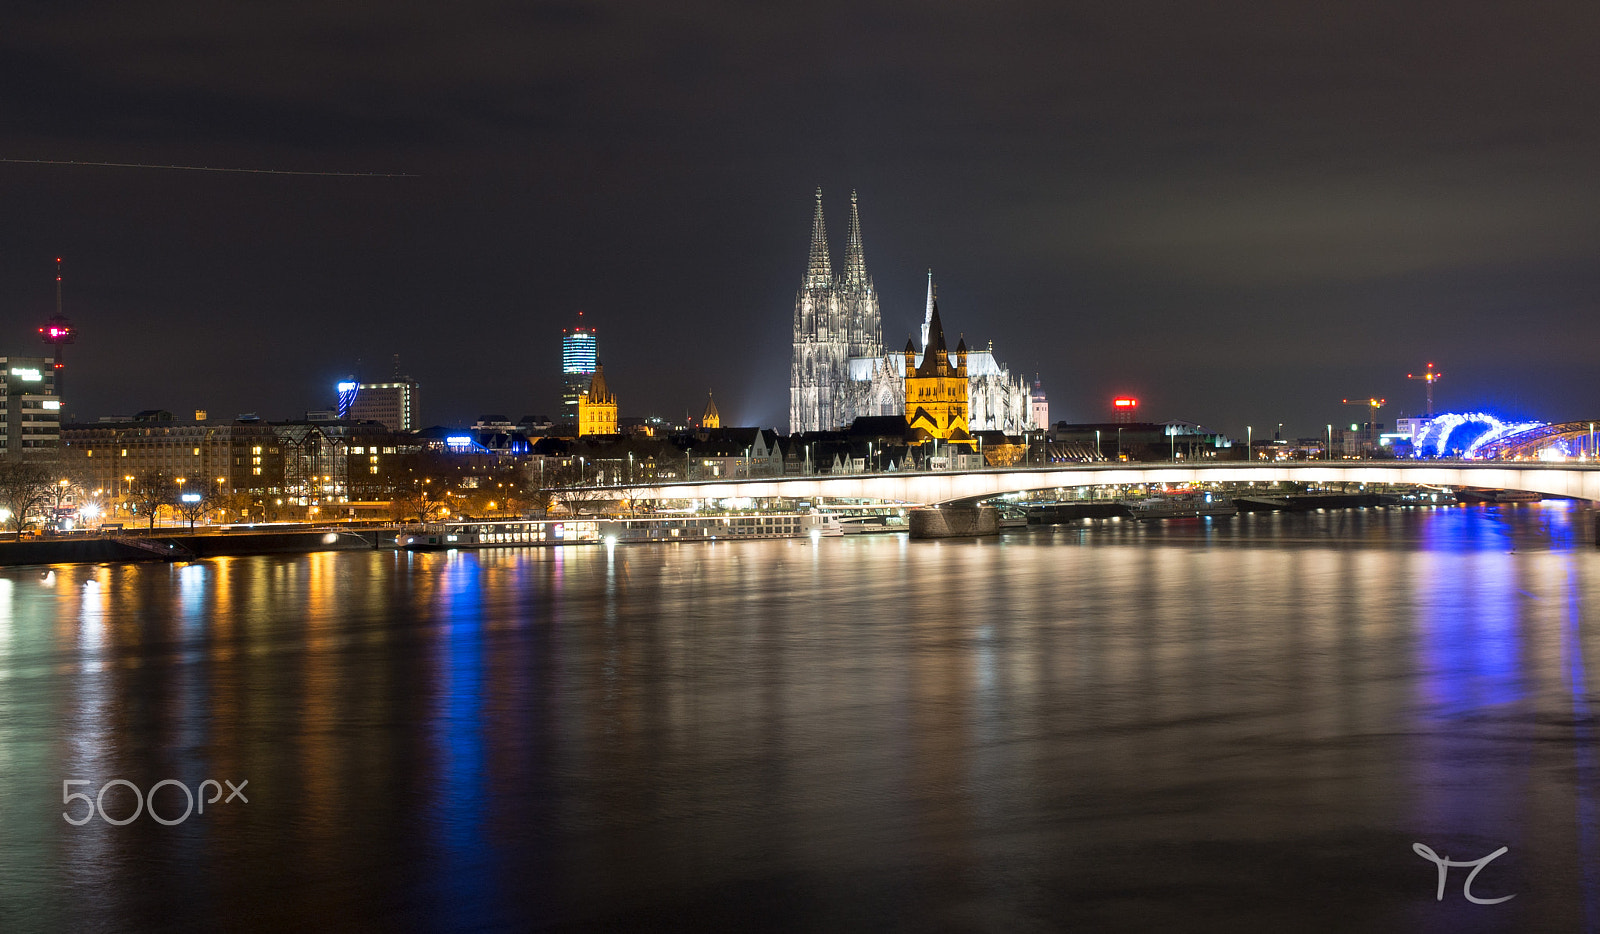 Sony a99 II sample photo. Spot on the cologne cathedral photography